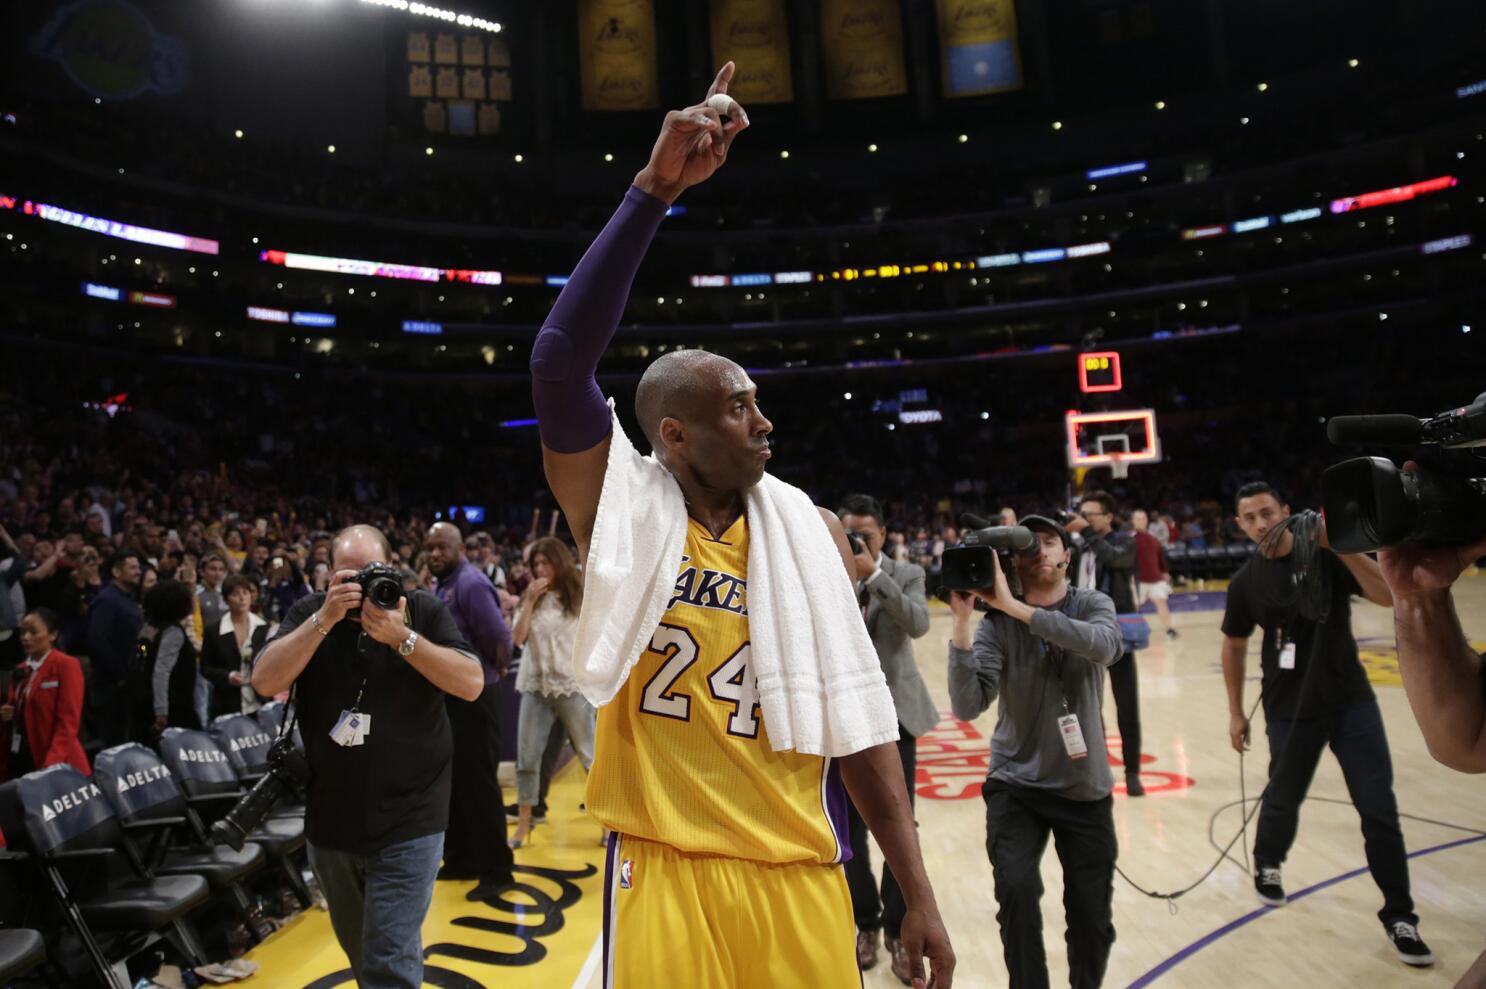 Kobe ready for his last shot with the Lakers